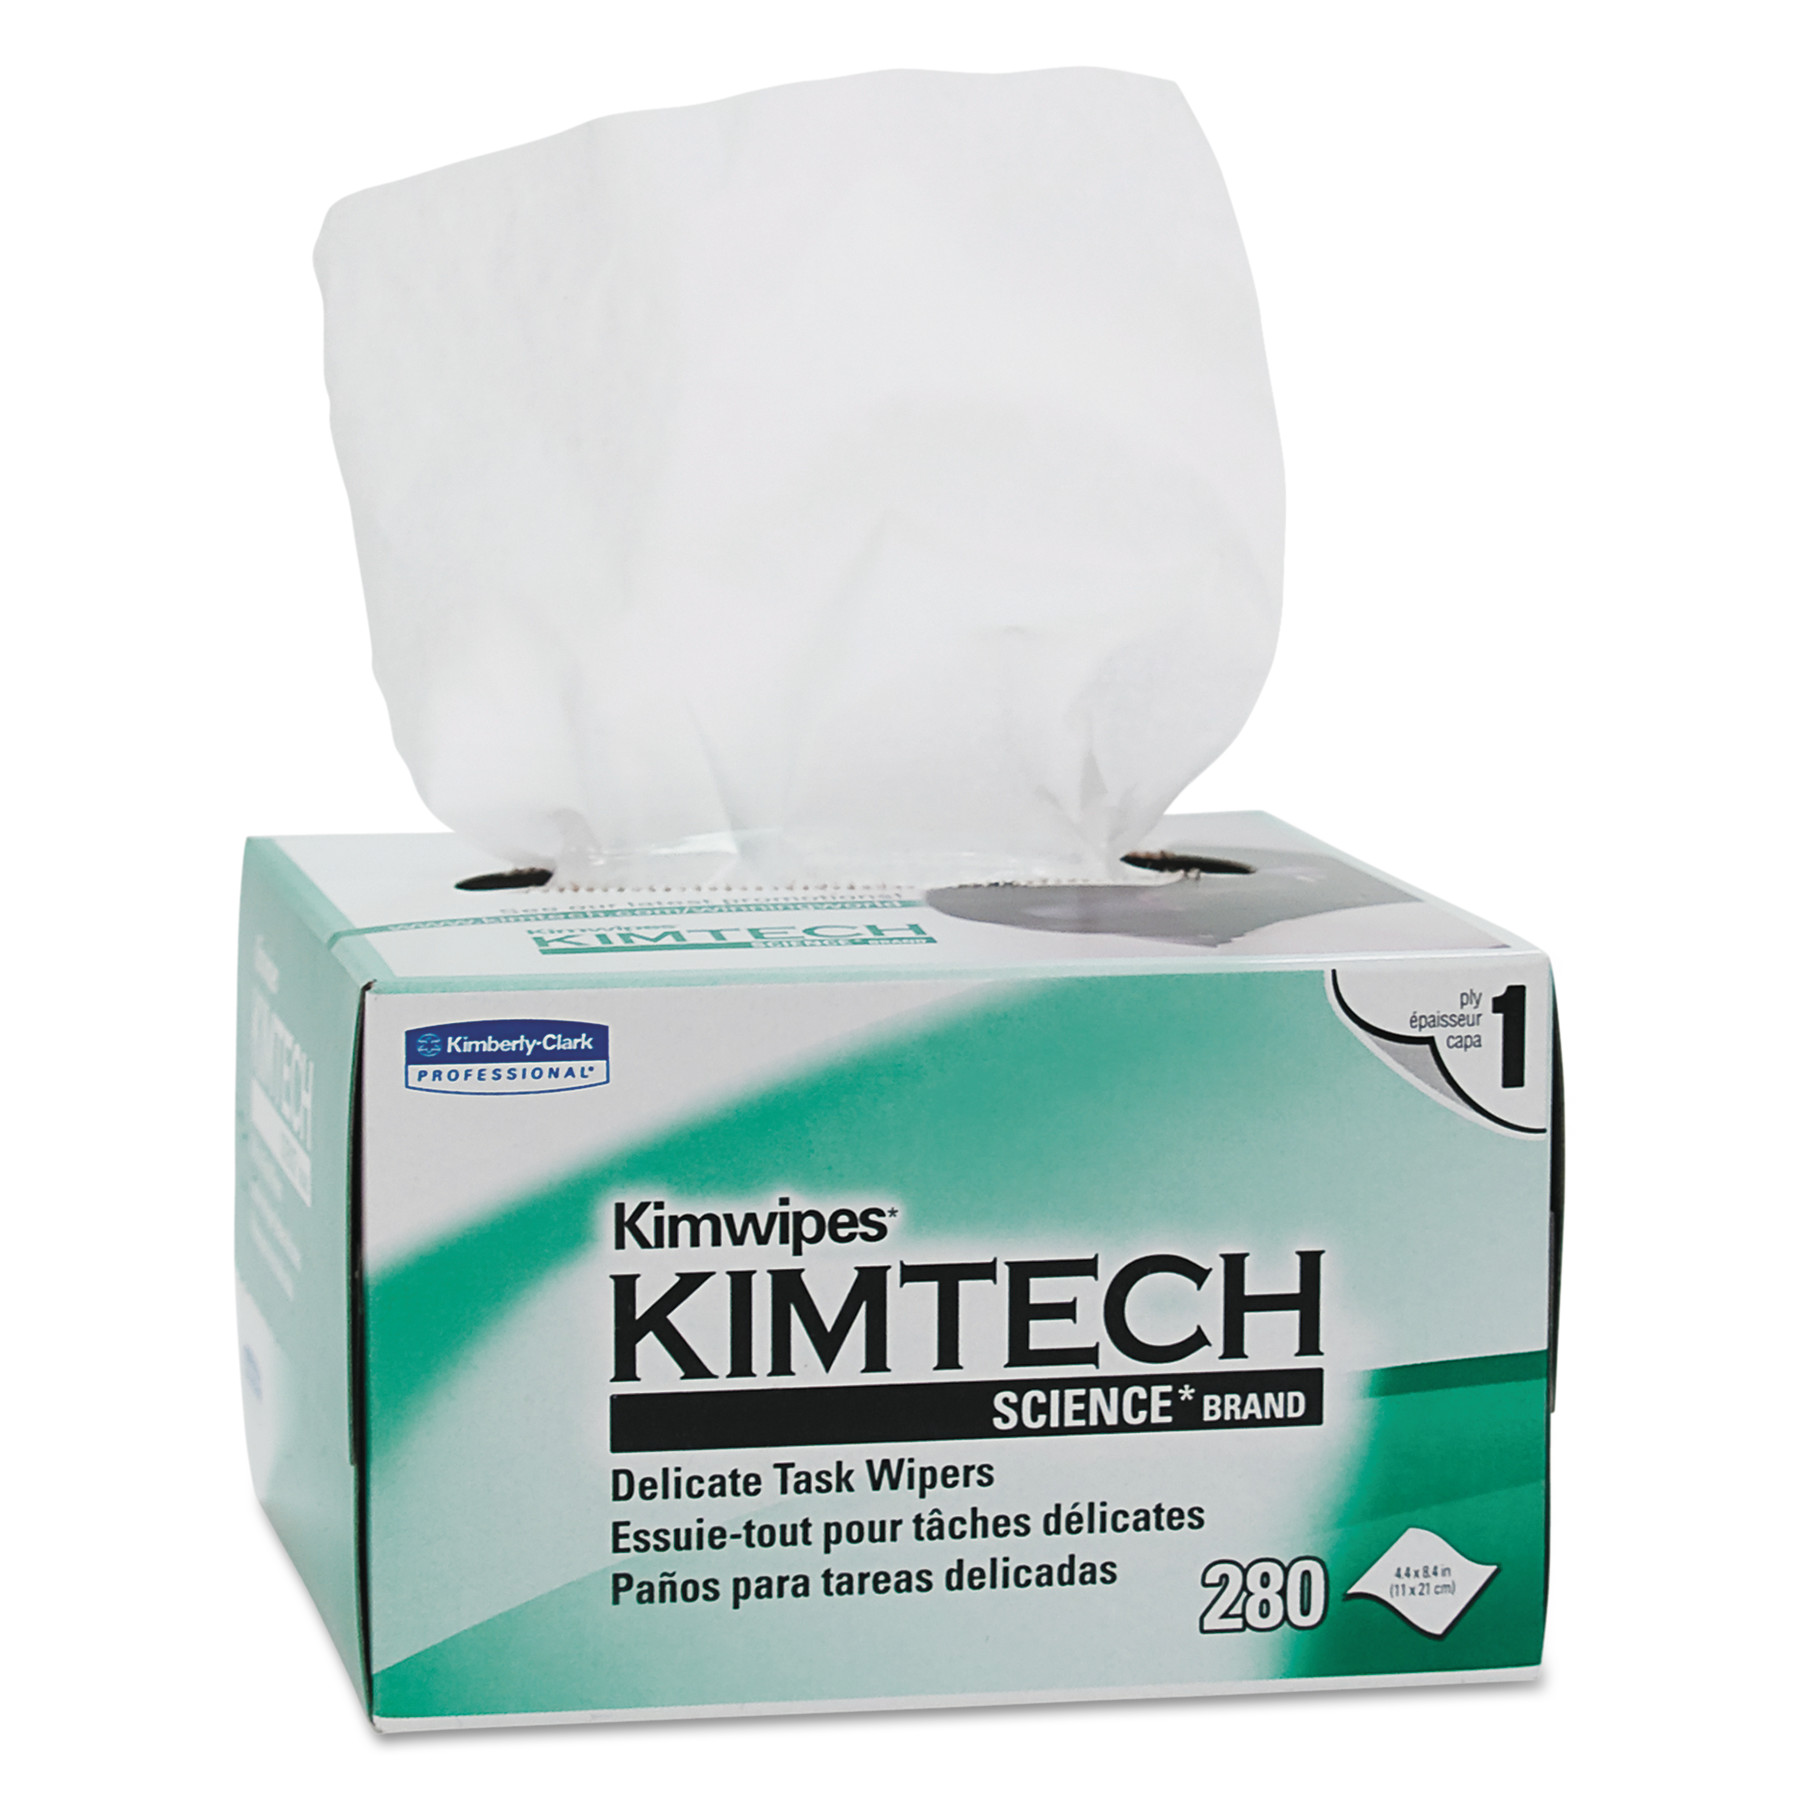 Kimwipes, Delicate Task Wipers, 1-Ply, 4.4 x 8.4, 286/Box, 60 Boxes/case